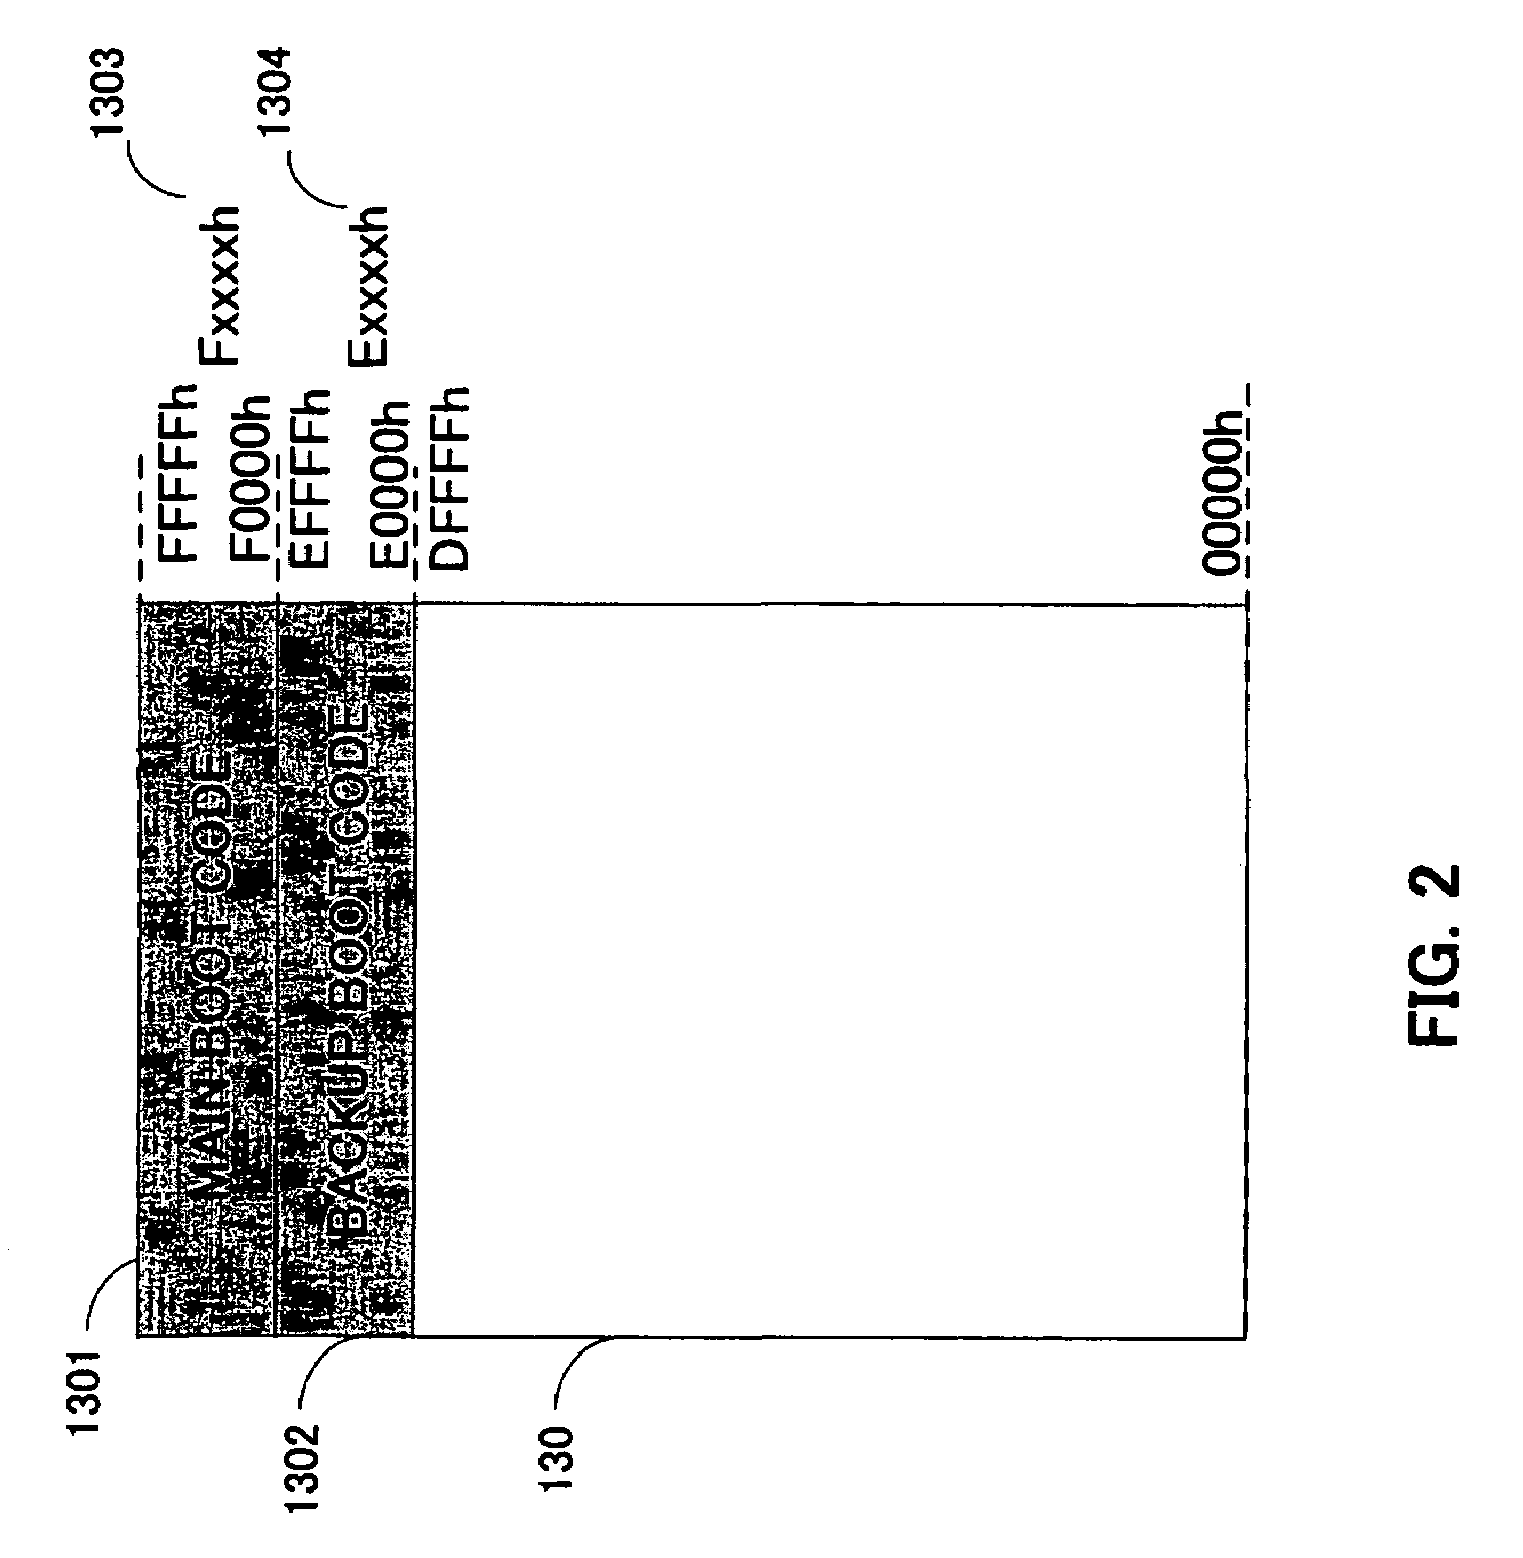 System and method for automatic booting based on single flash ROM